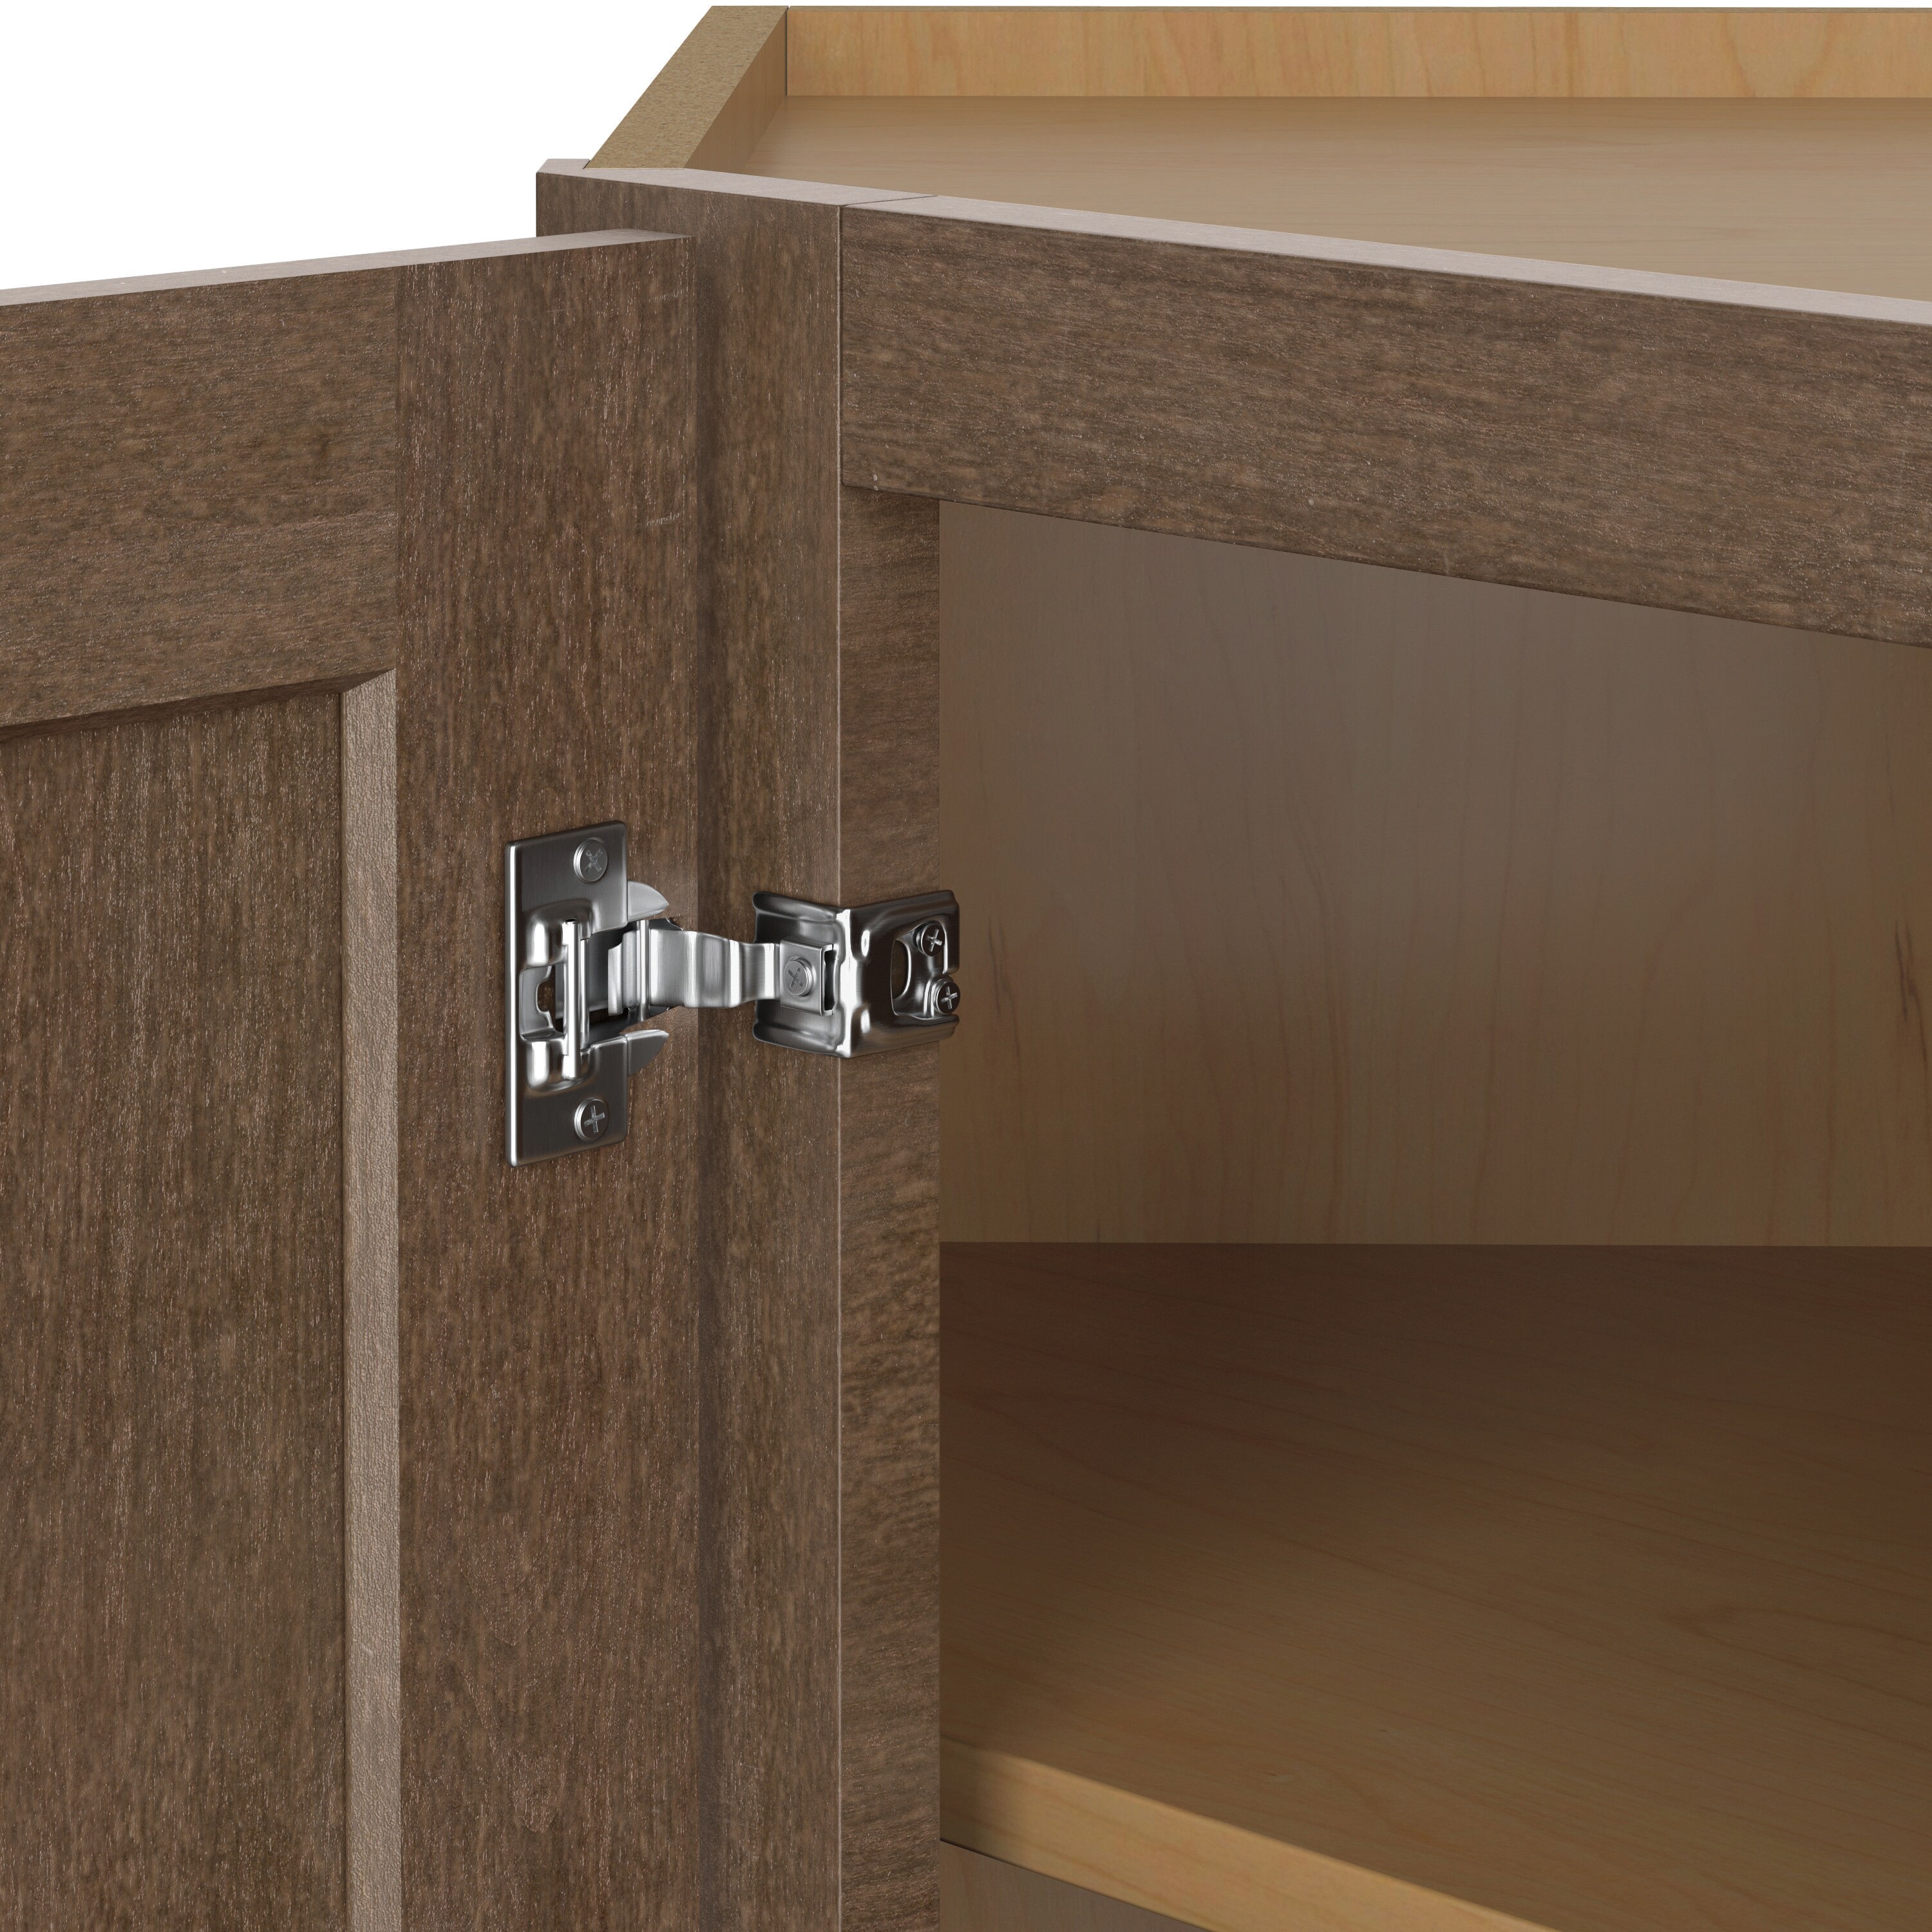 Diamond at Lowes - Organization - Tray Divider in Top Hinge Wall